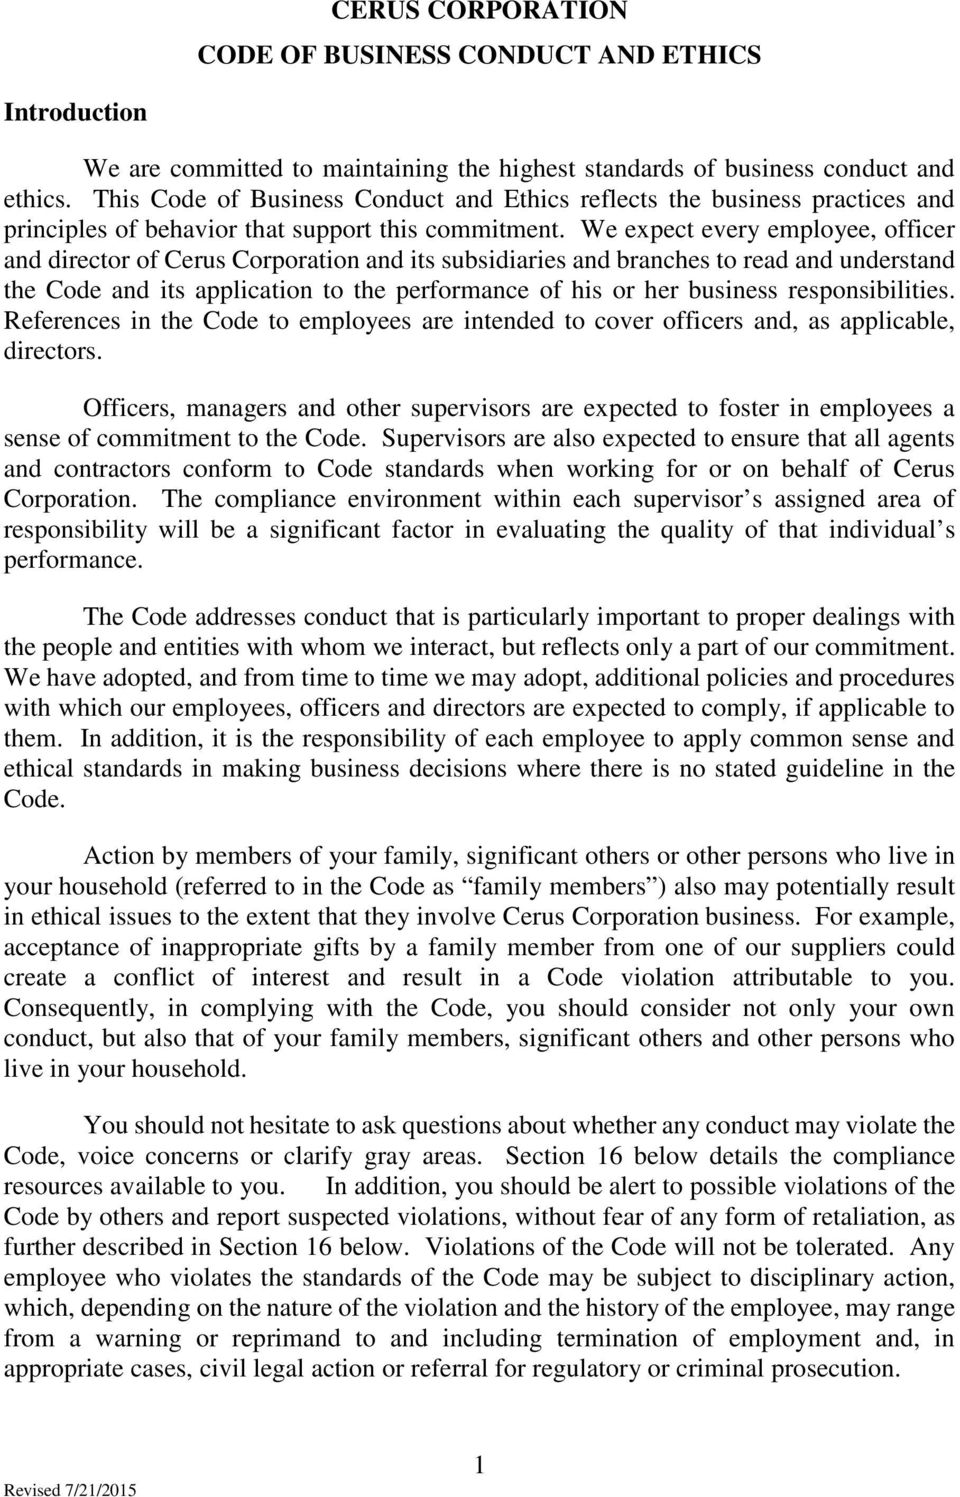 We expect every employee, officer and director of Cerus Corporation and its subsidiaries and branches to read and understand the Code and its application to the performance of his or her business